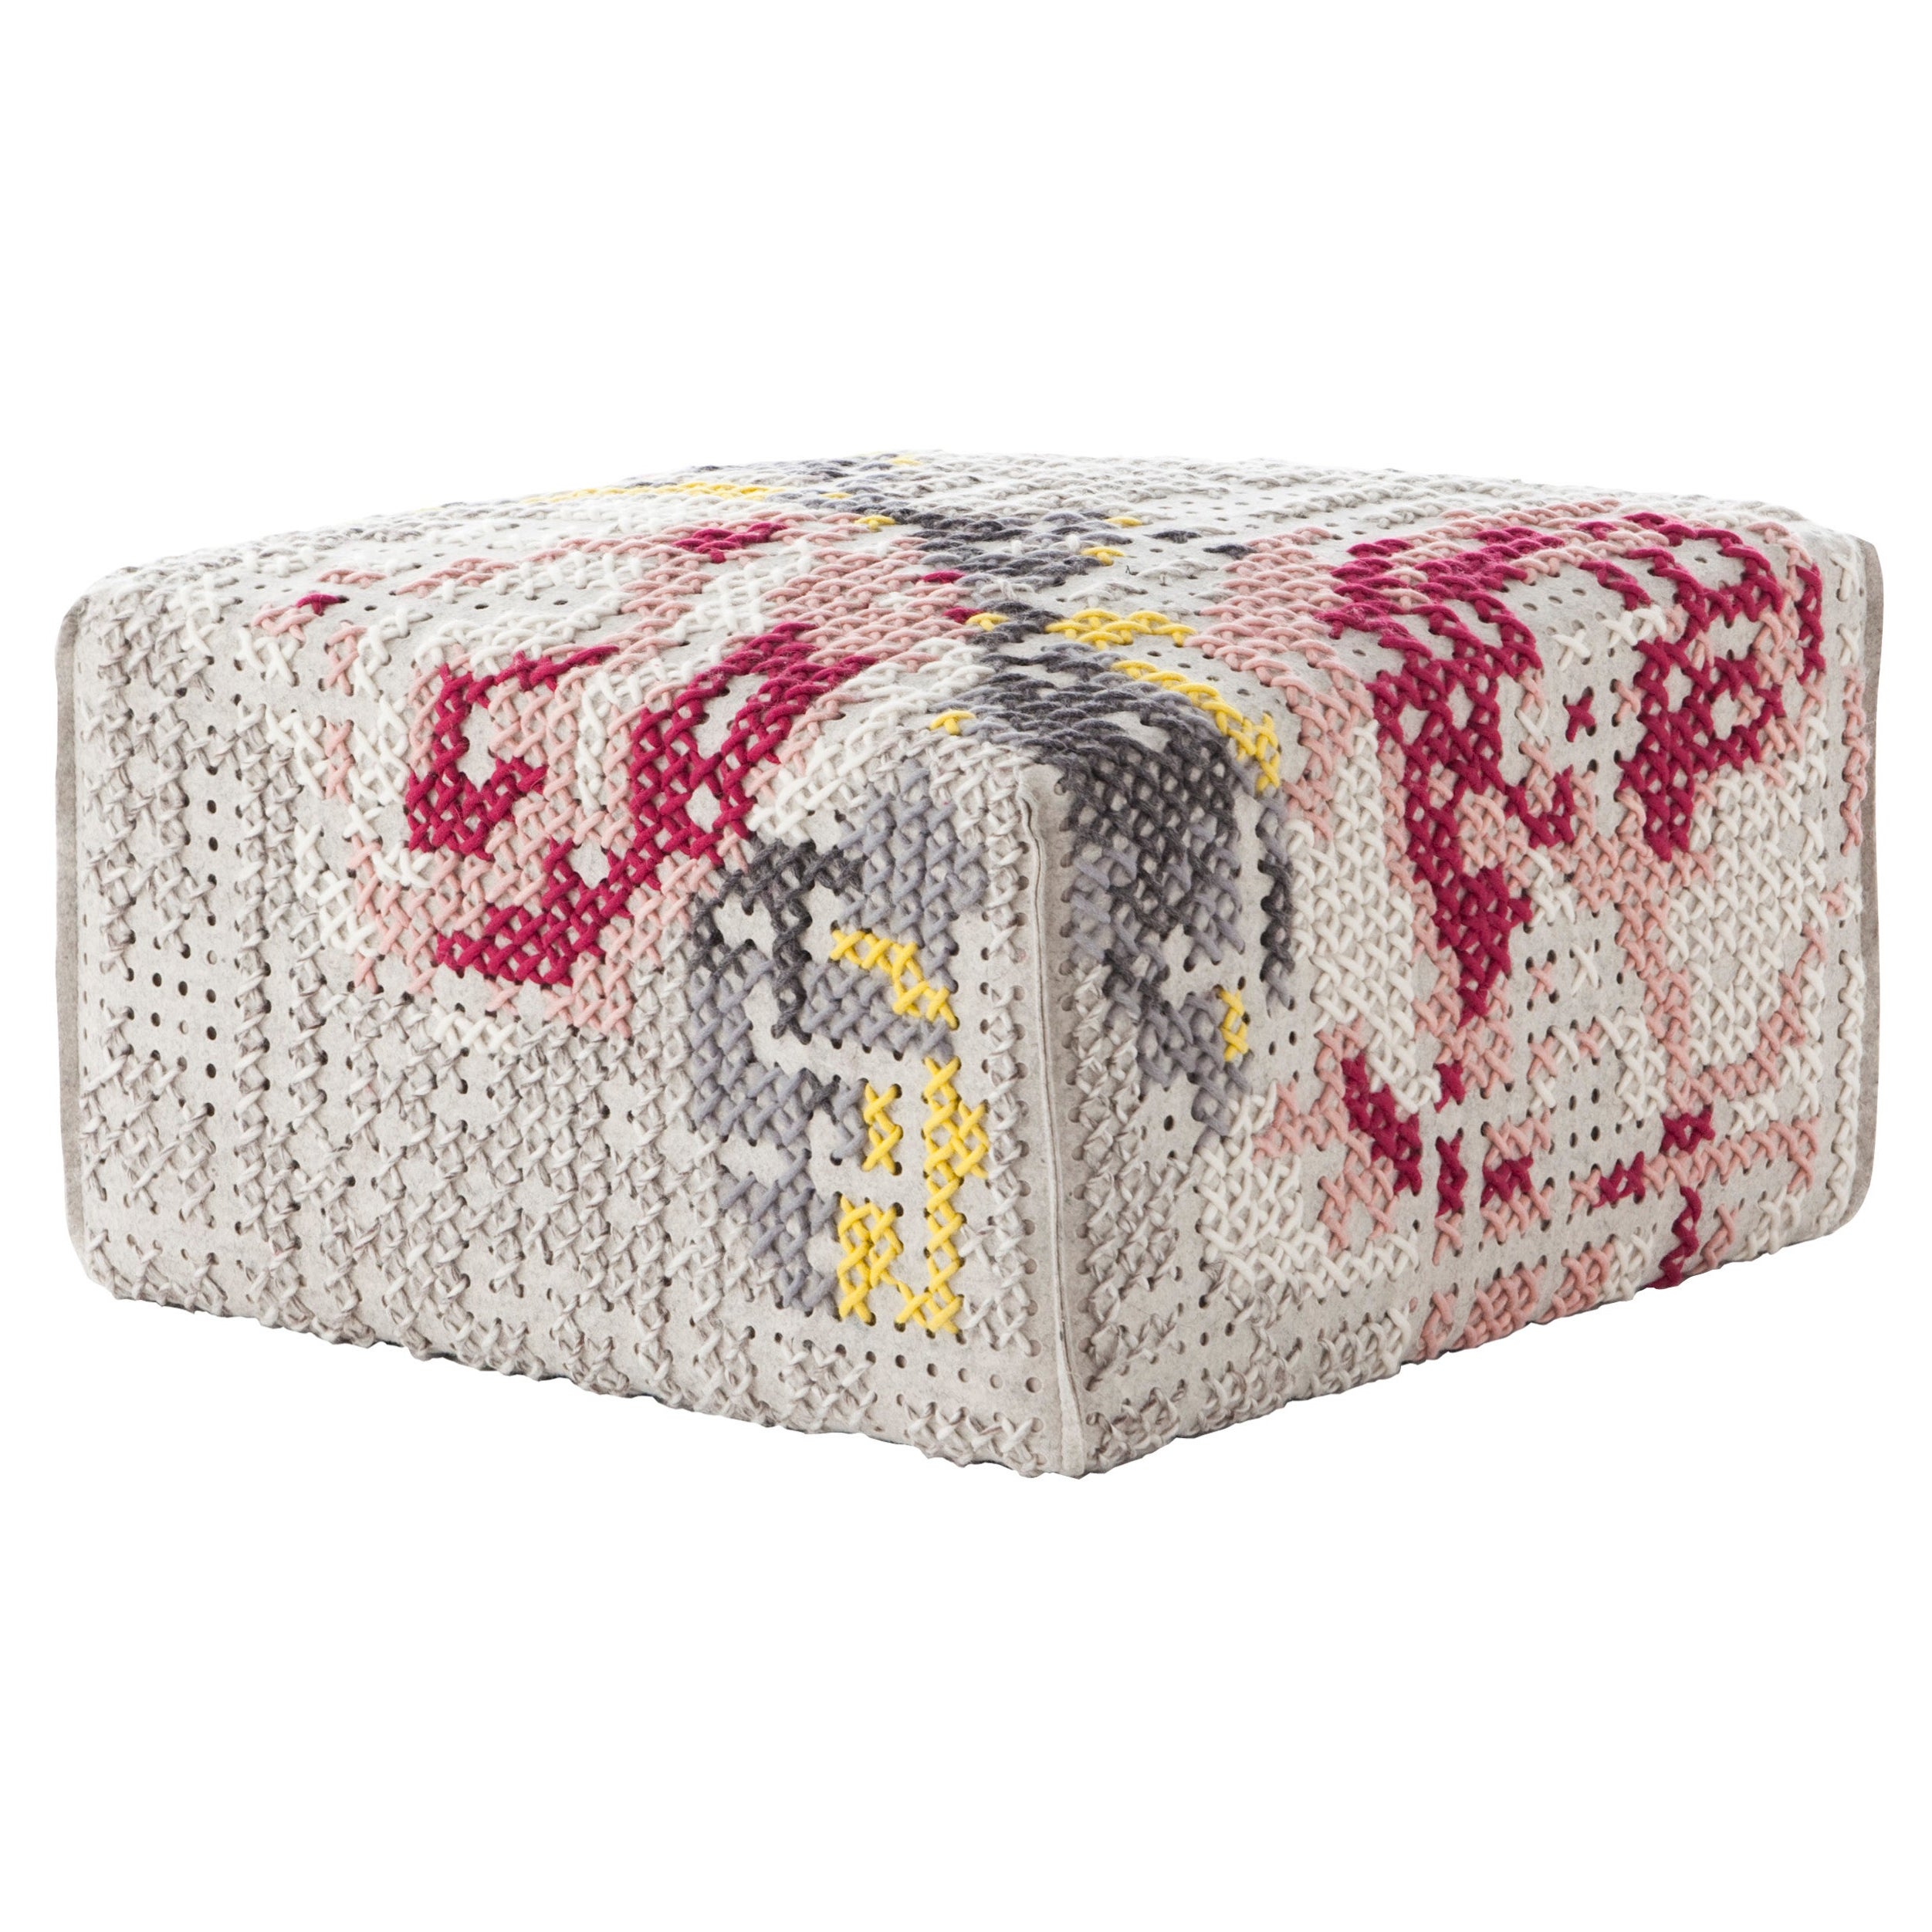 GAN Spaces Canevas Square Flowers Pouf in Natural by Charlotte Lancelot